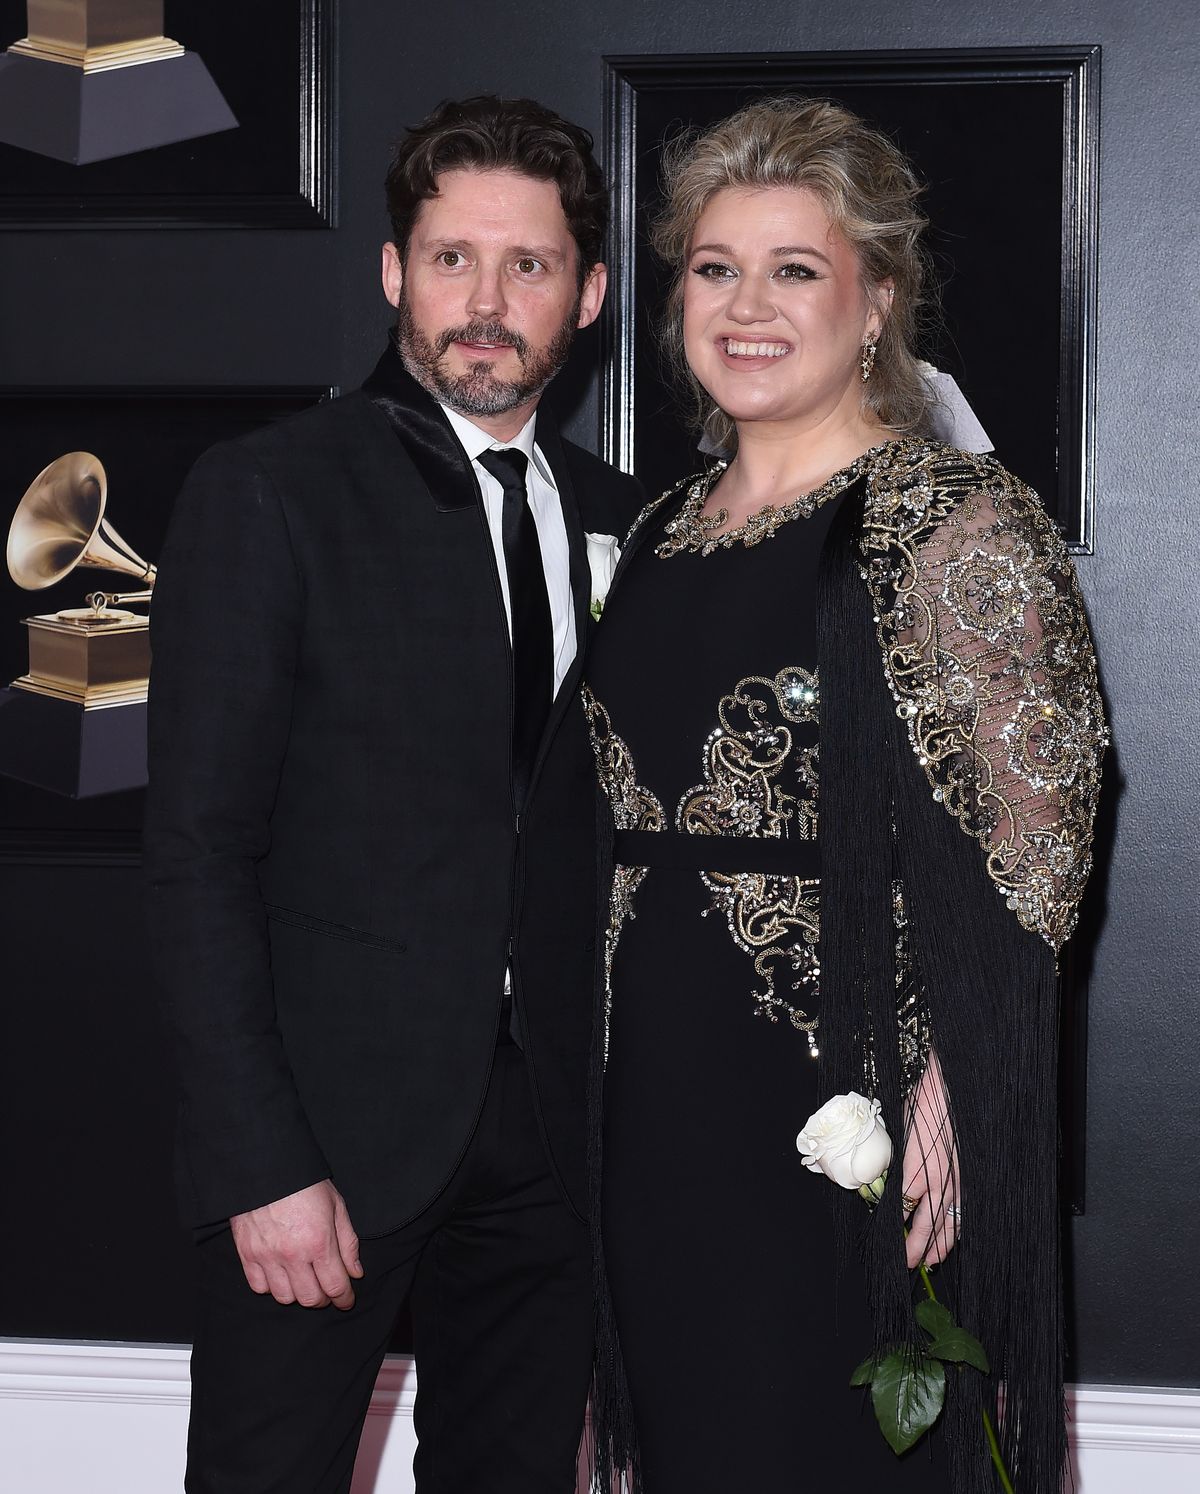 Brandon Blackstock and Kelly Clarkson at the 60th Annual Grammy Awards on January 28, 2018, in New York City | Photo: Axelle/Bauer-Griffin/FilmMagic/Getty Images